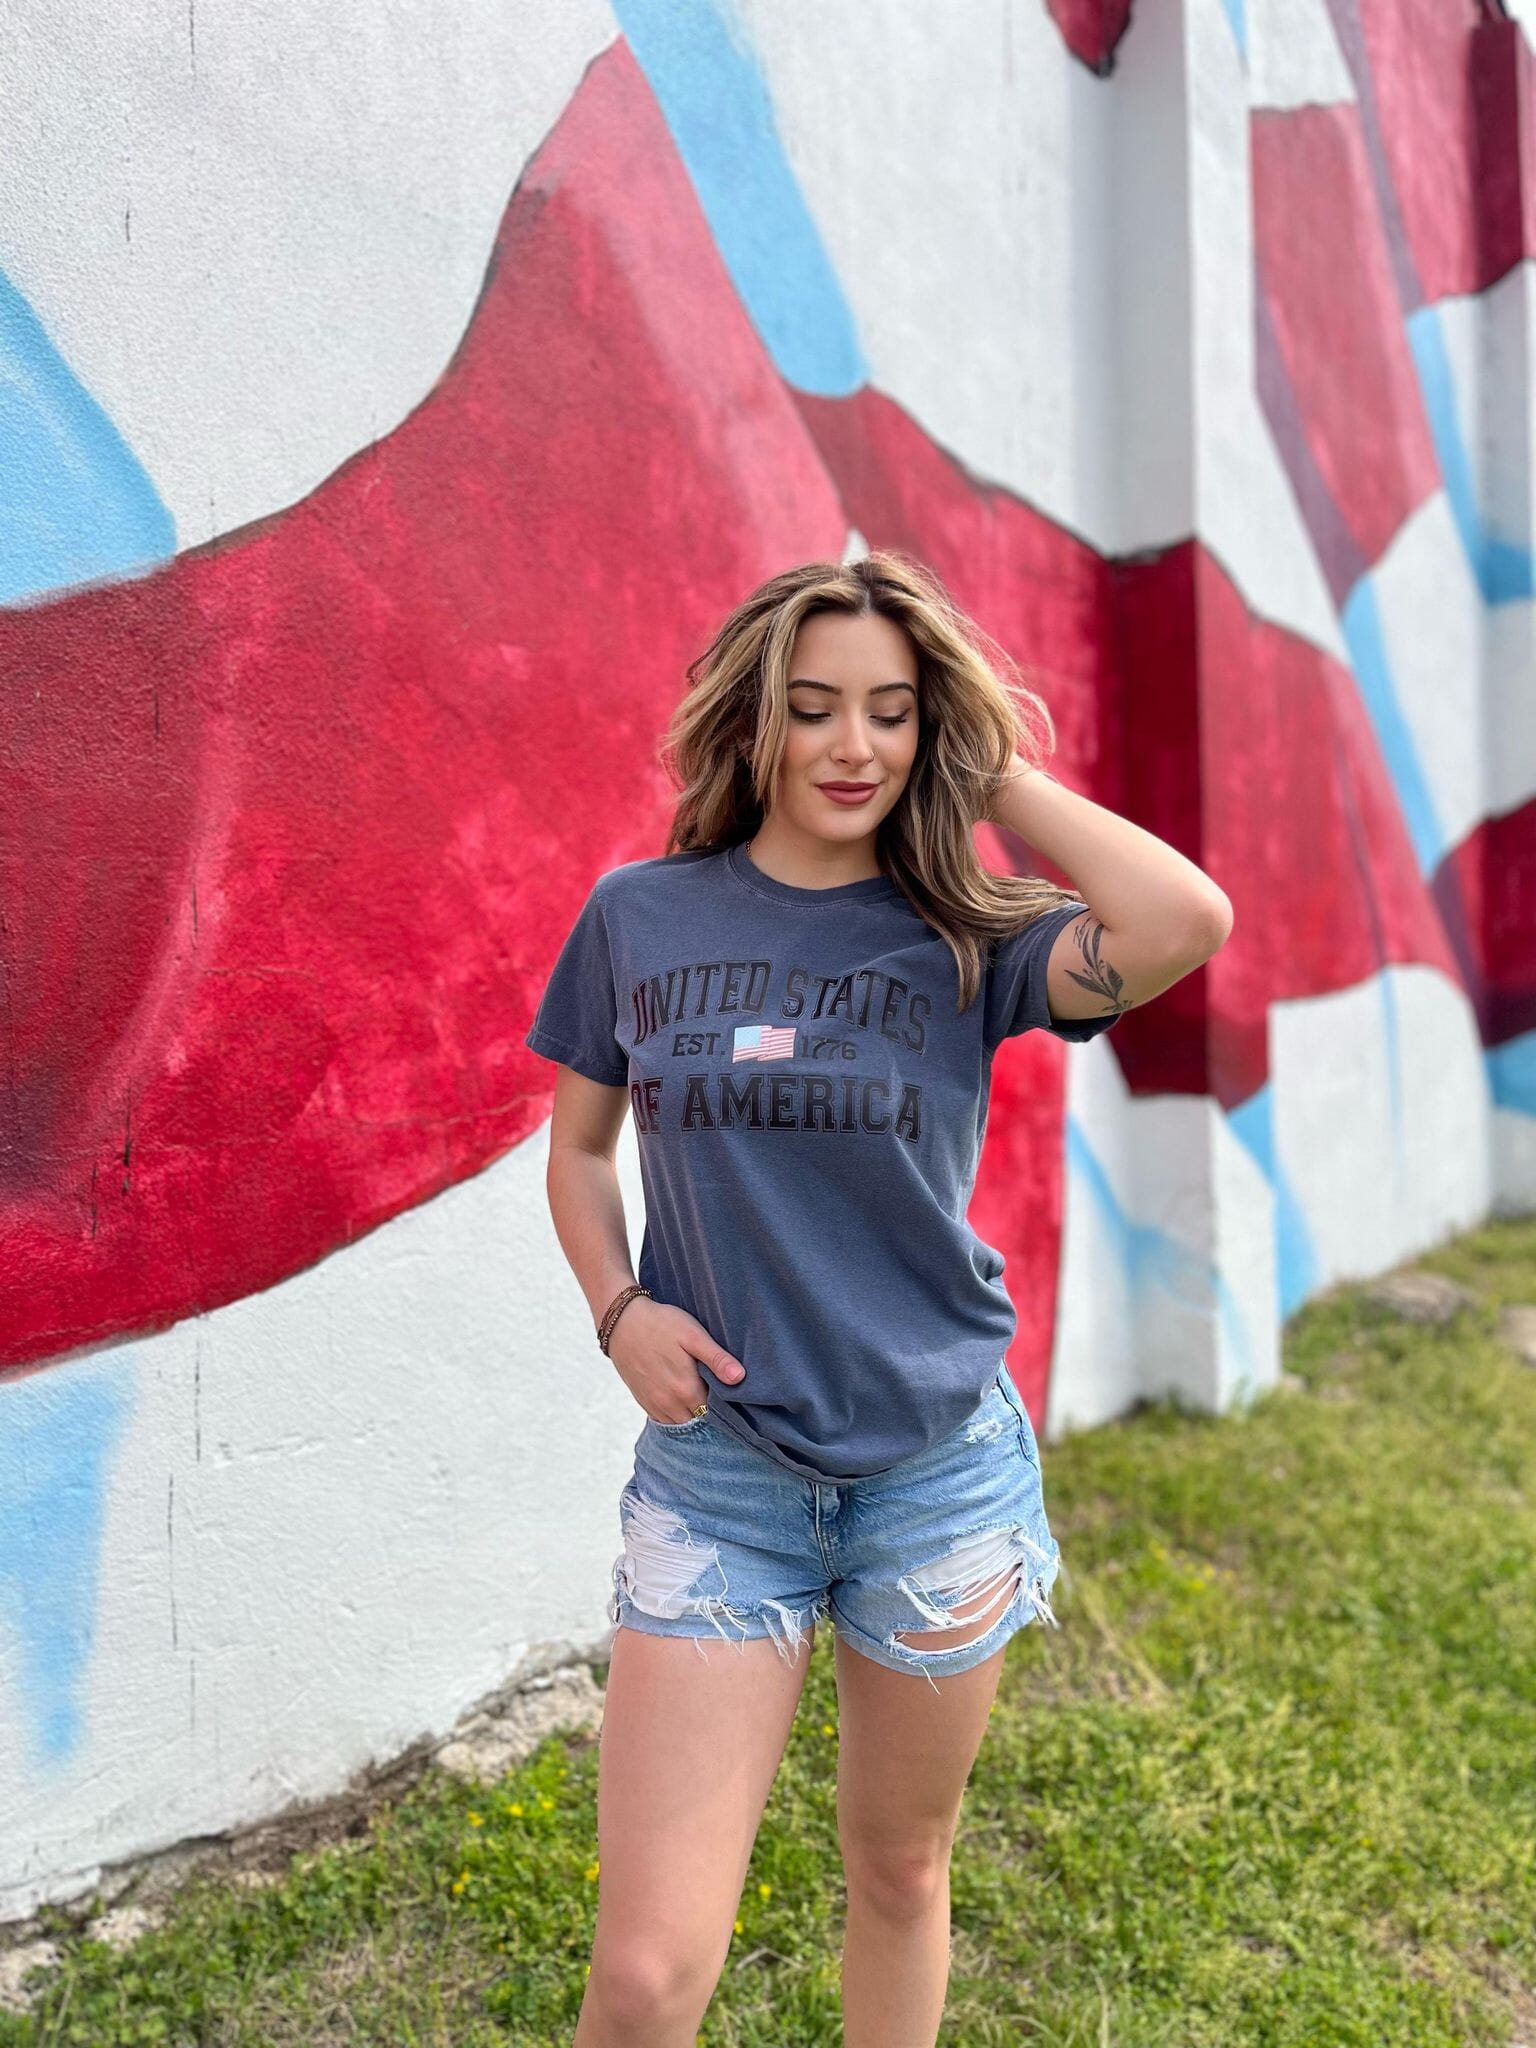 United States of America Tee ask apparel wholesale 